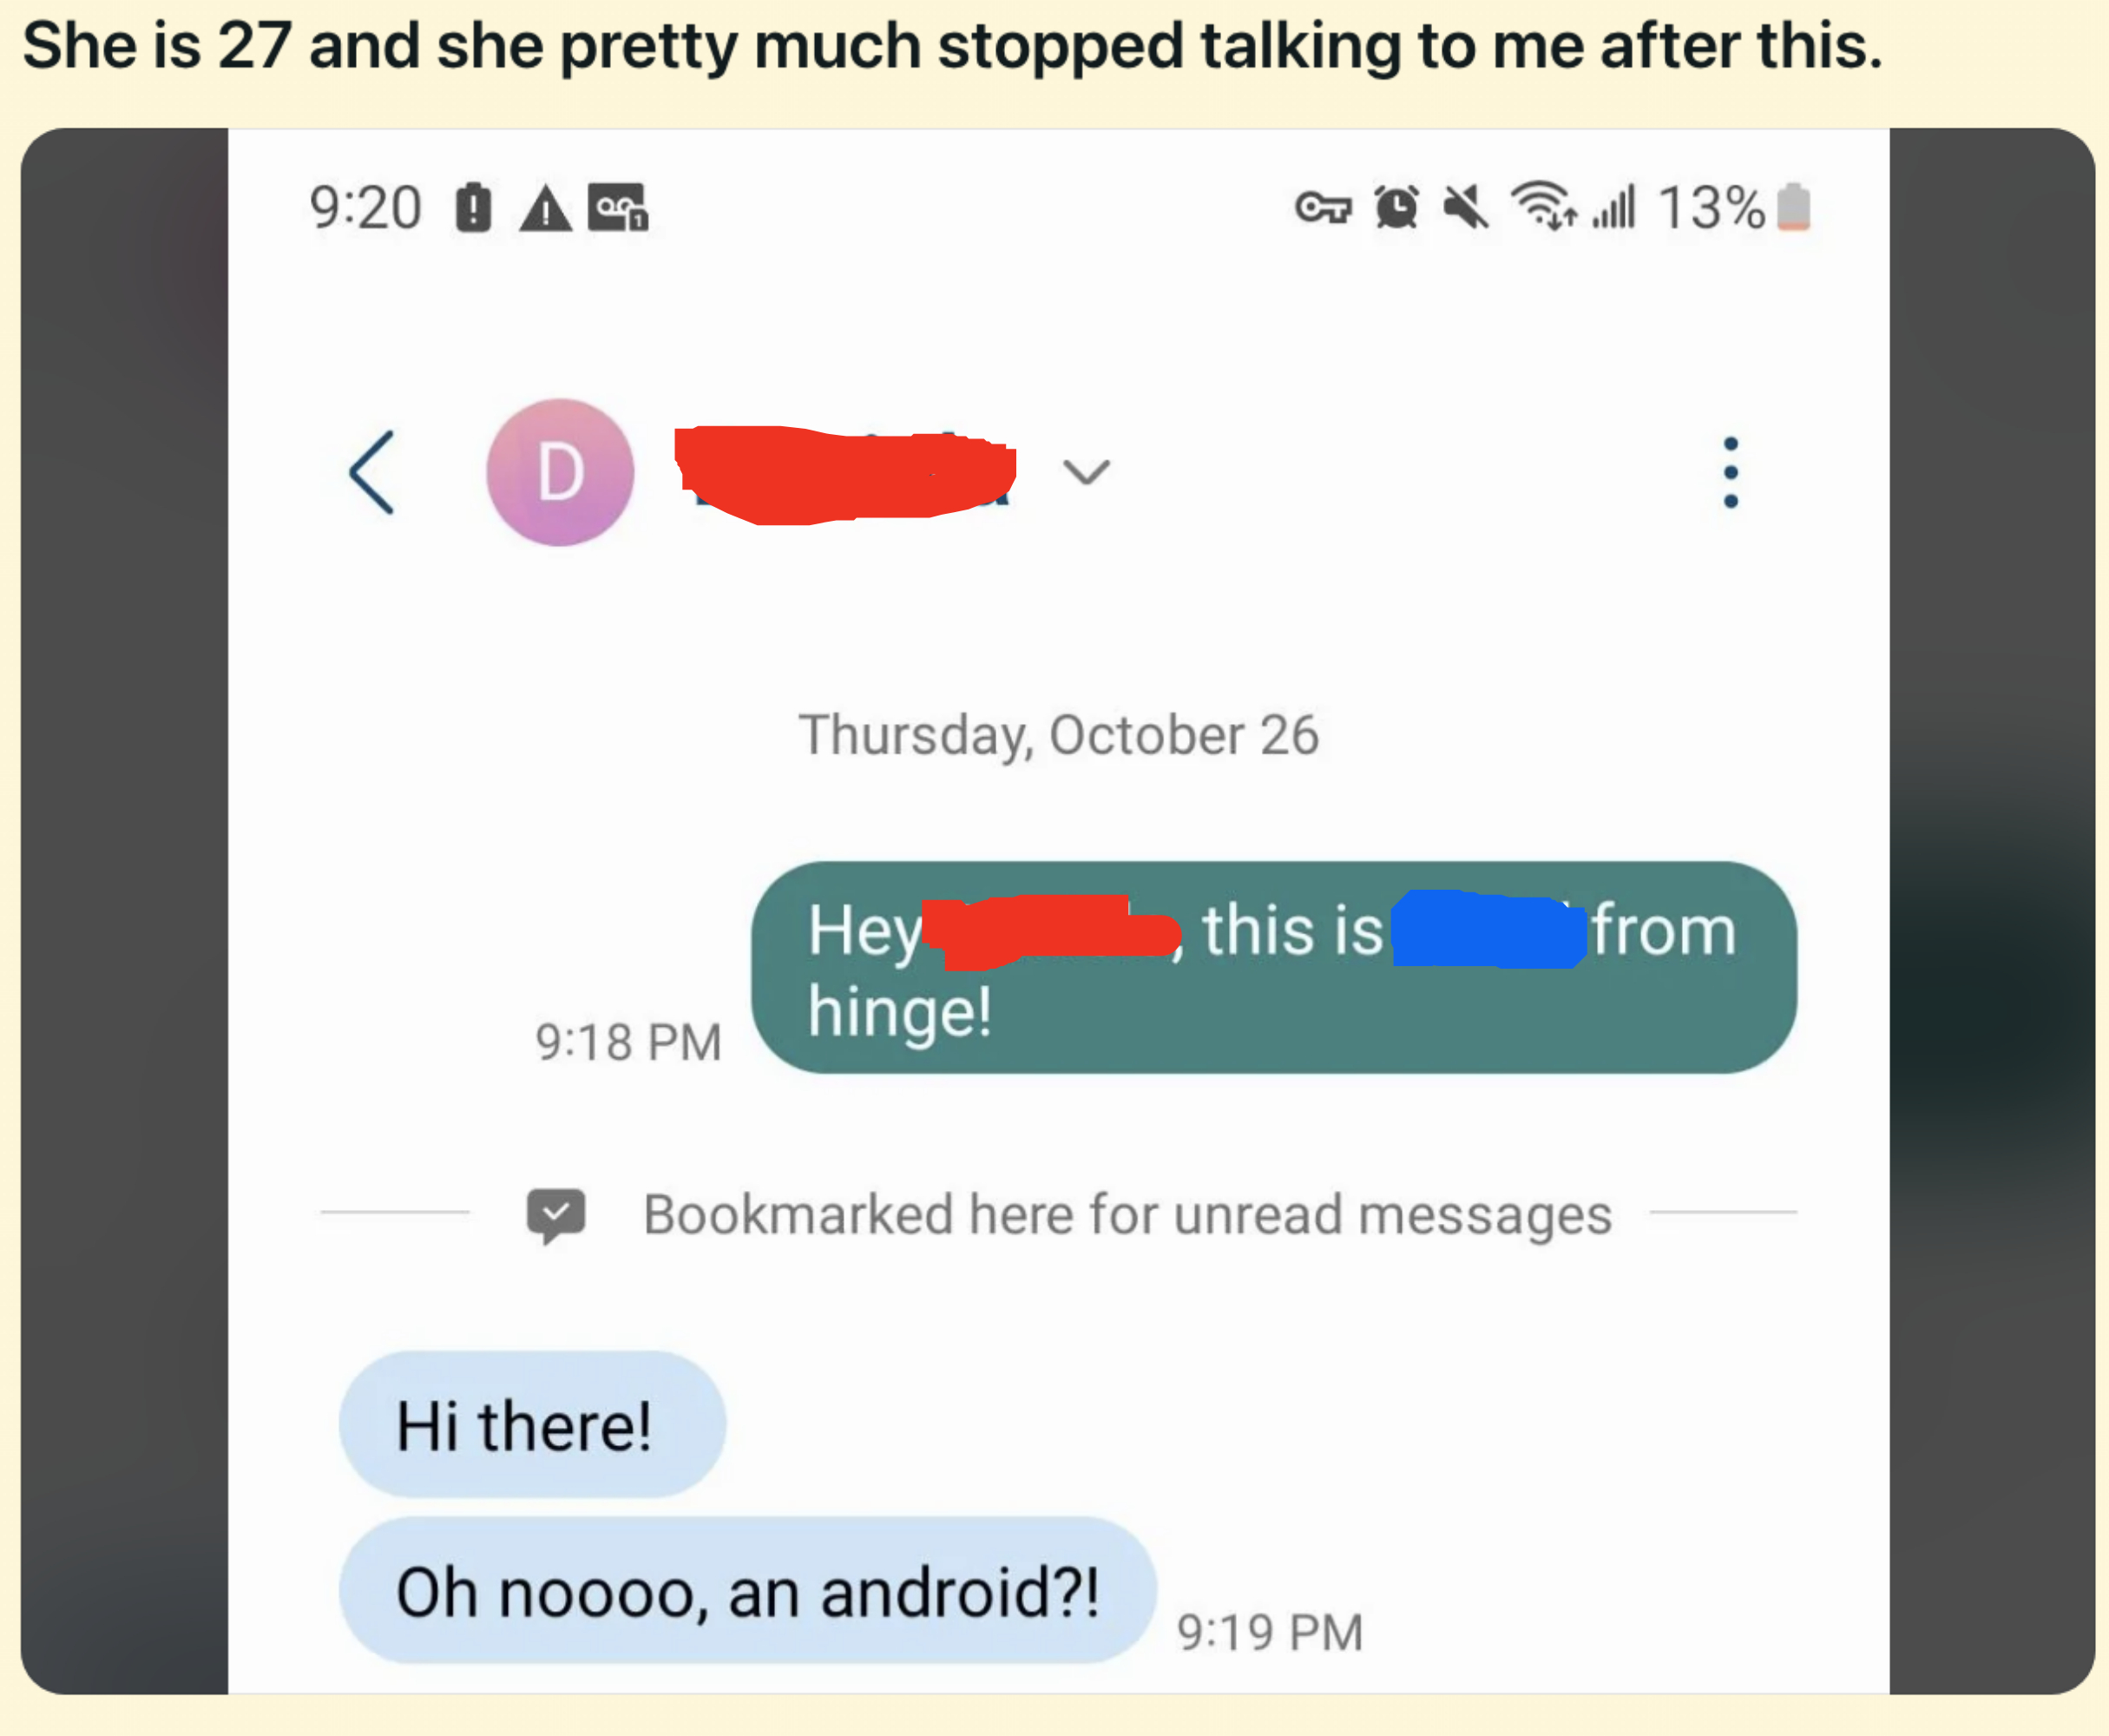 they say, oh noooo an android?